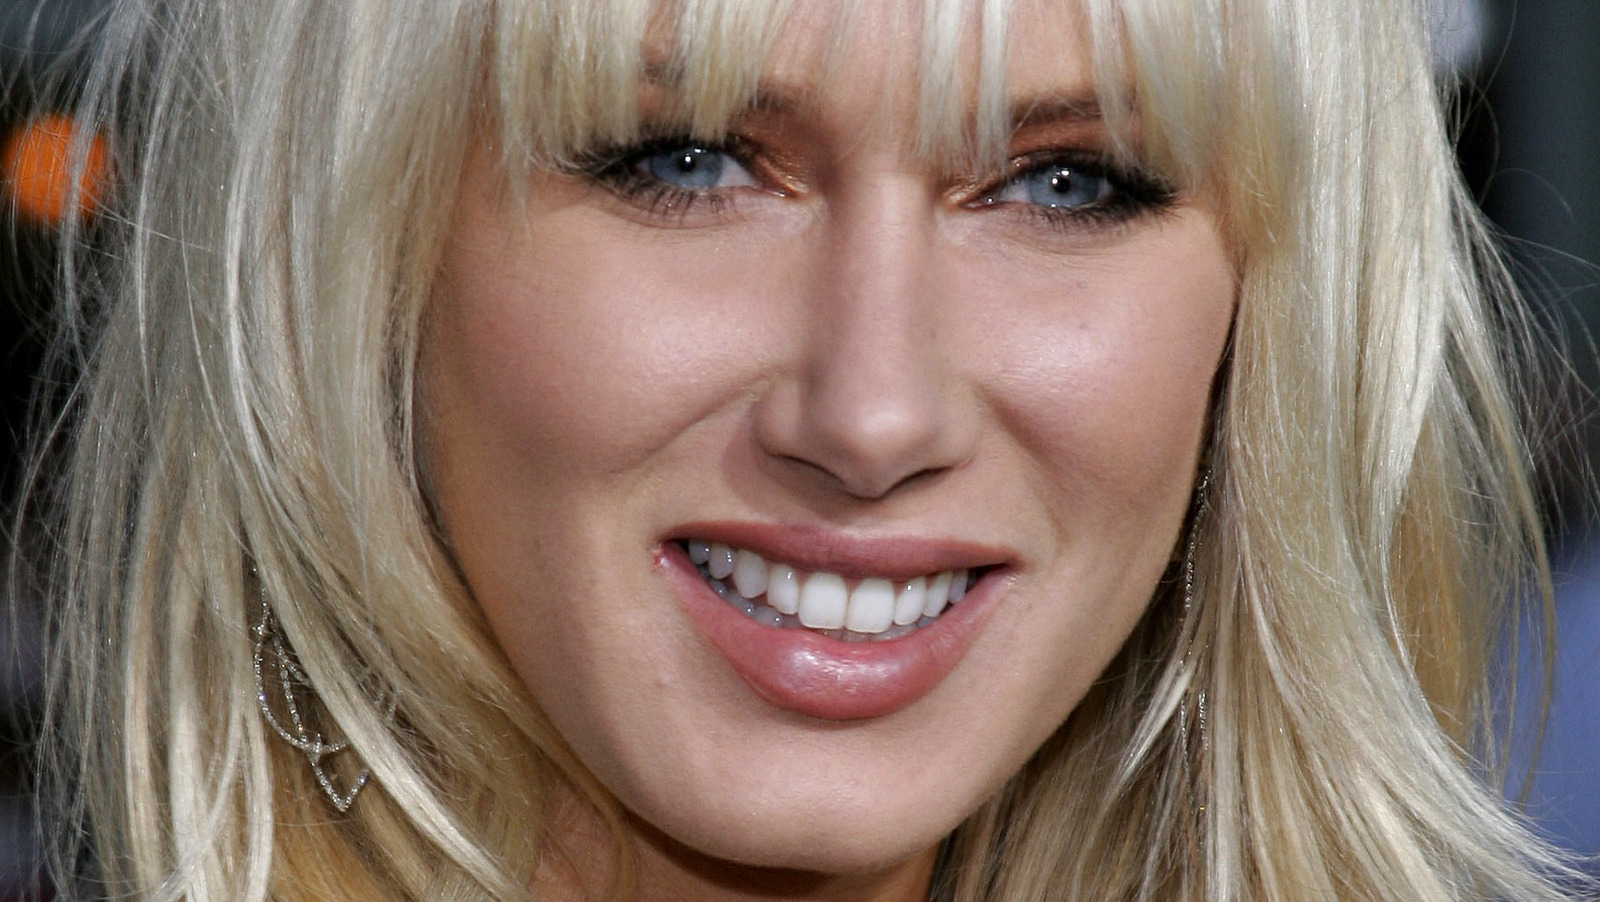 The Unexpected Way Kimberly Stewart Followed In The Kardashians’ Footsteps